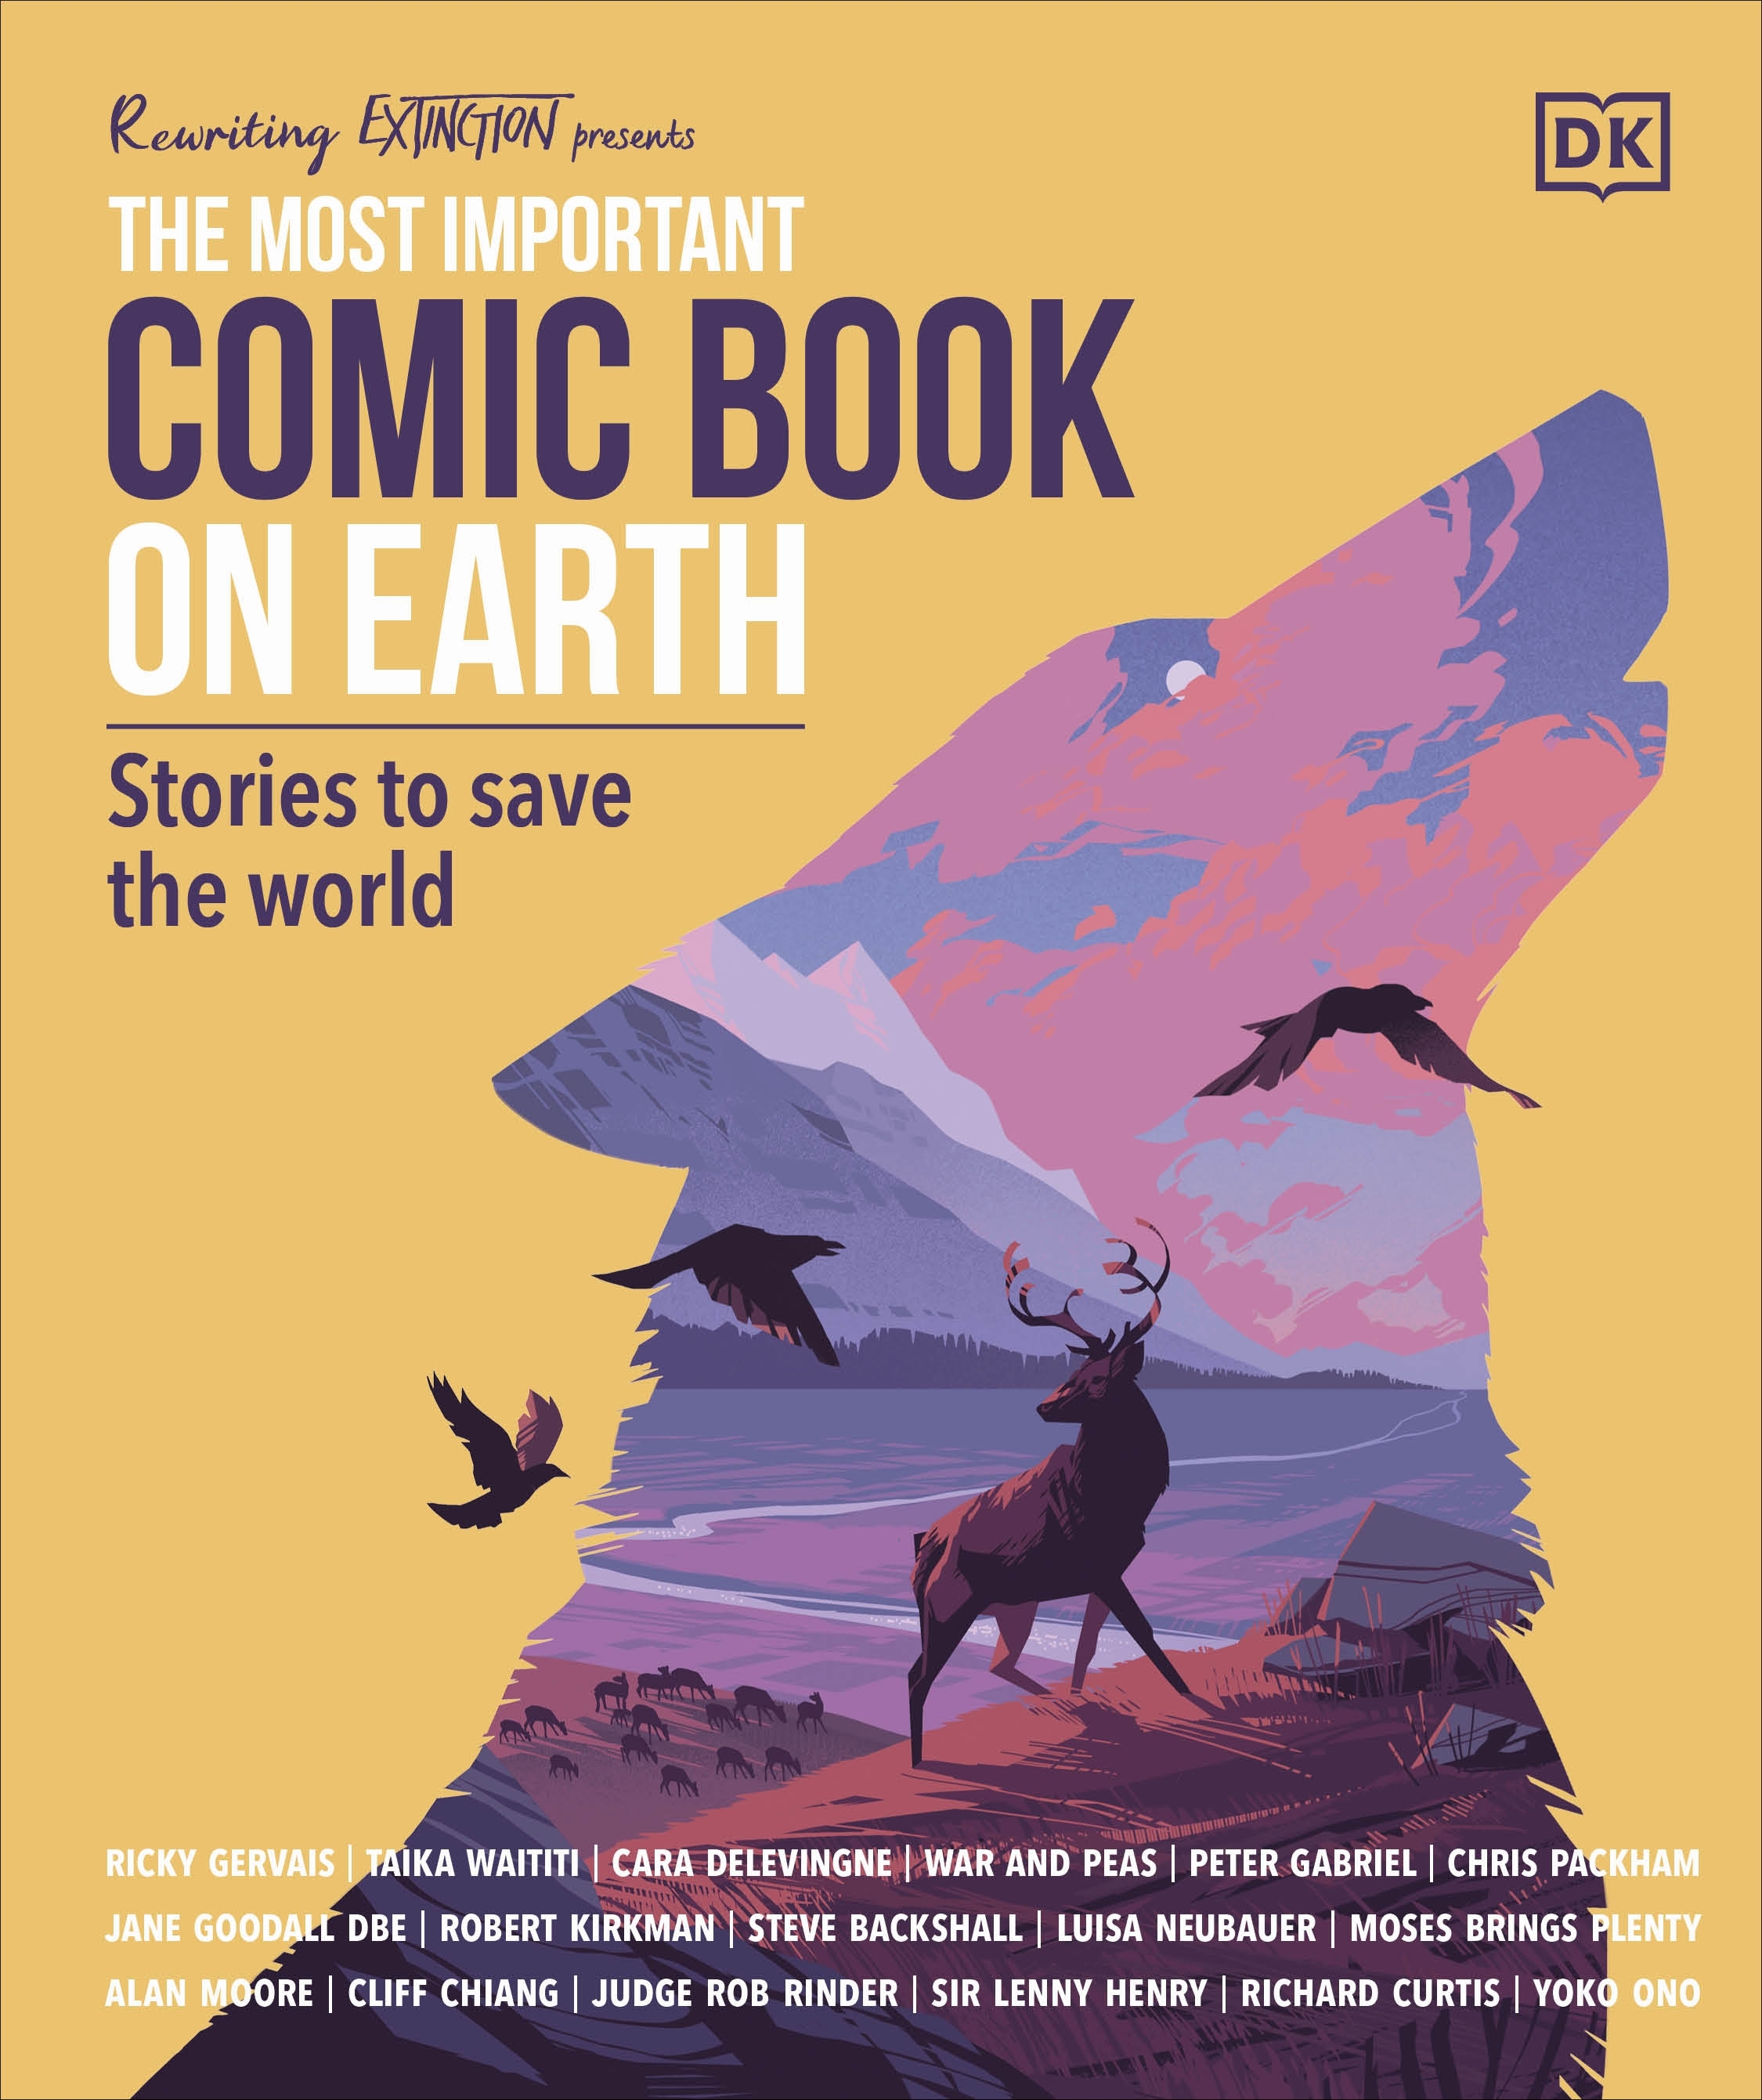 The Most Important Comic Book on Earth by DK - Penguin Books Australia